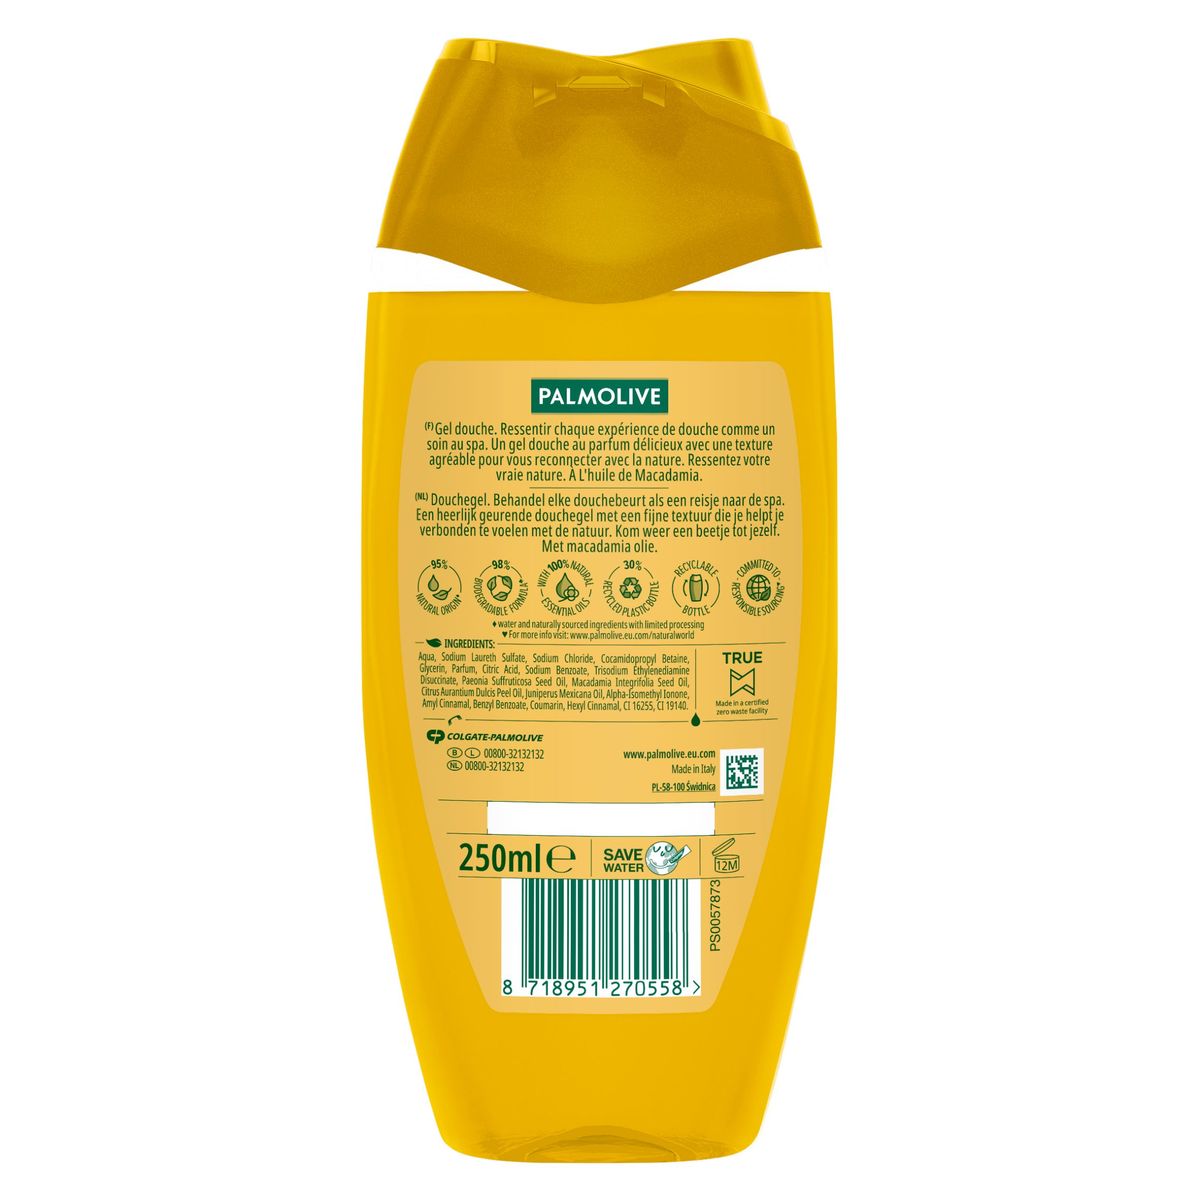 Palmolive Thermal Pampering Oil, Gel douche, 250 ml